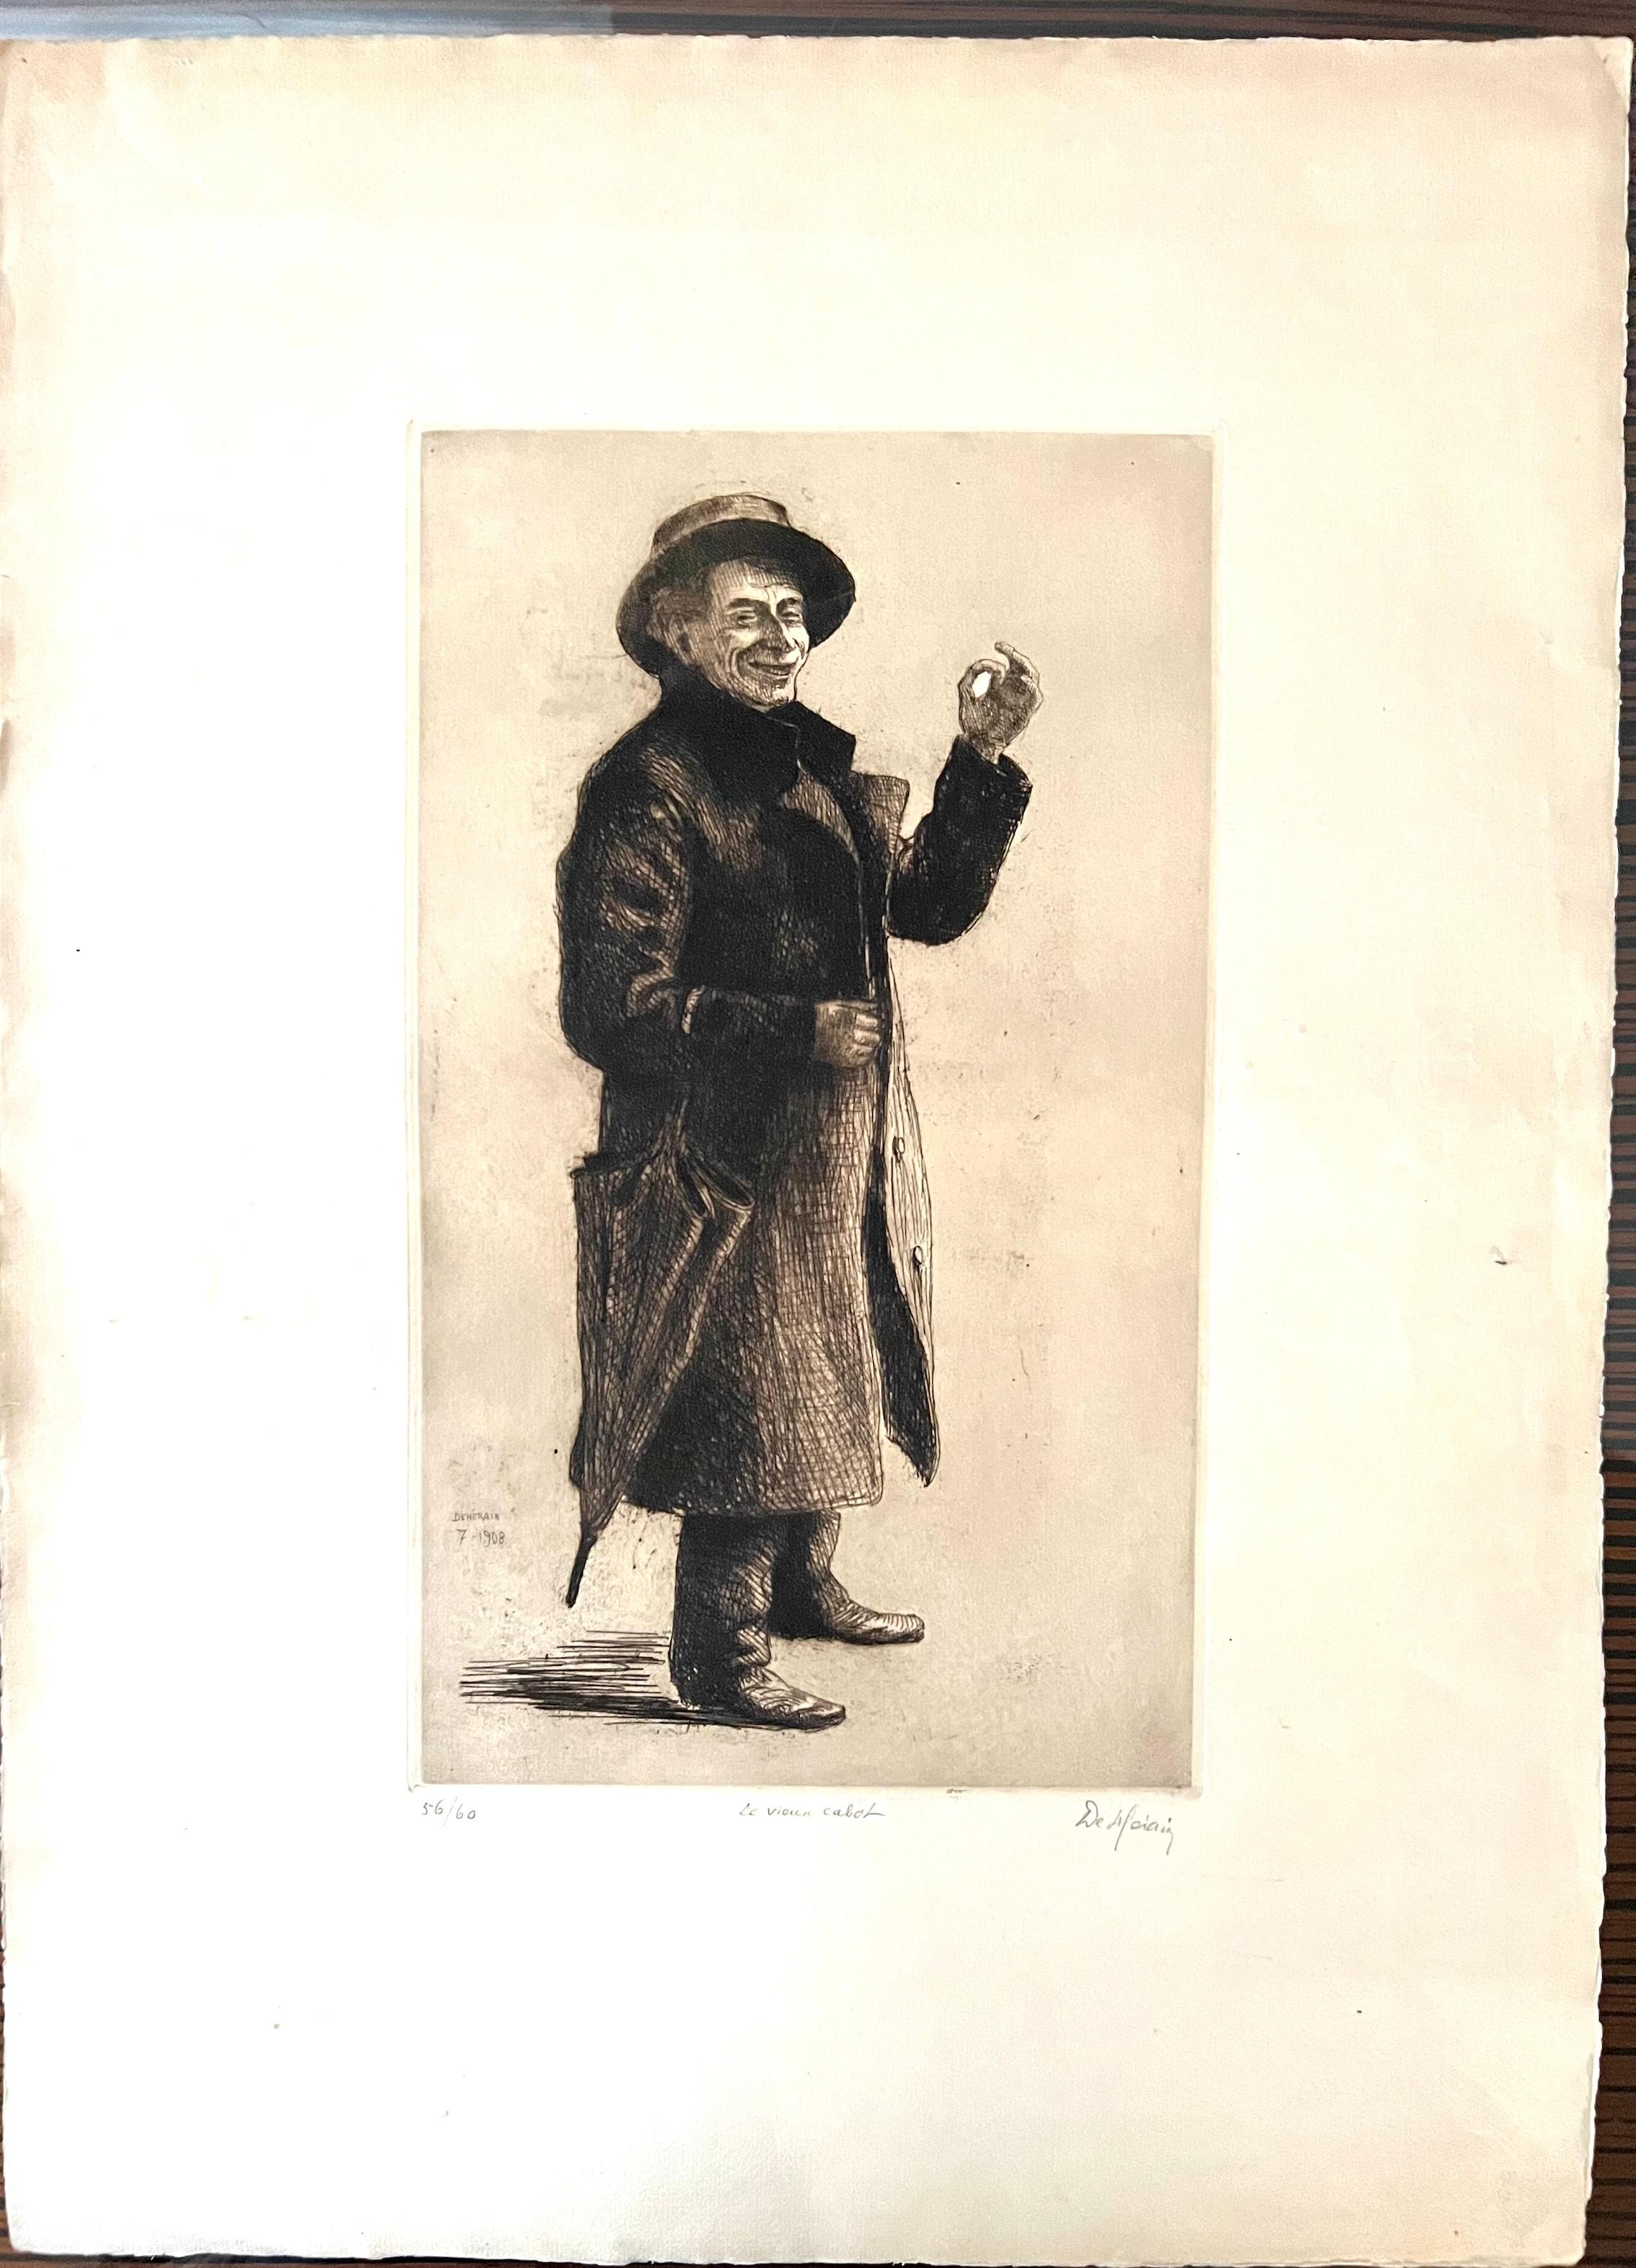 François DE HERAIN (1877-1962) is a French painter, sculptor and engraver. 
The drawing depicts a man in a coat and hat holding an umbrella at his side. He is making a gesture with two fingers while displaying a smirk on his face. The author titled